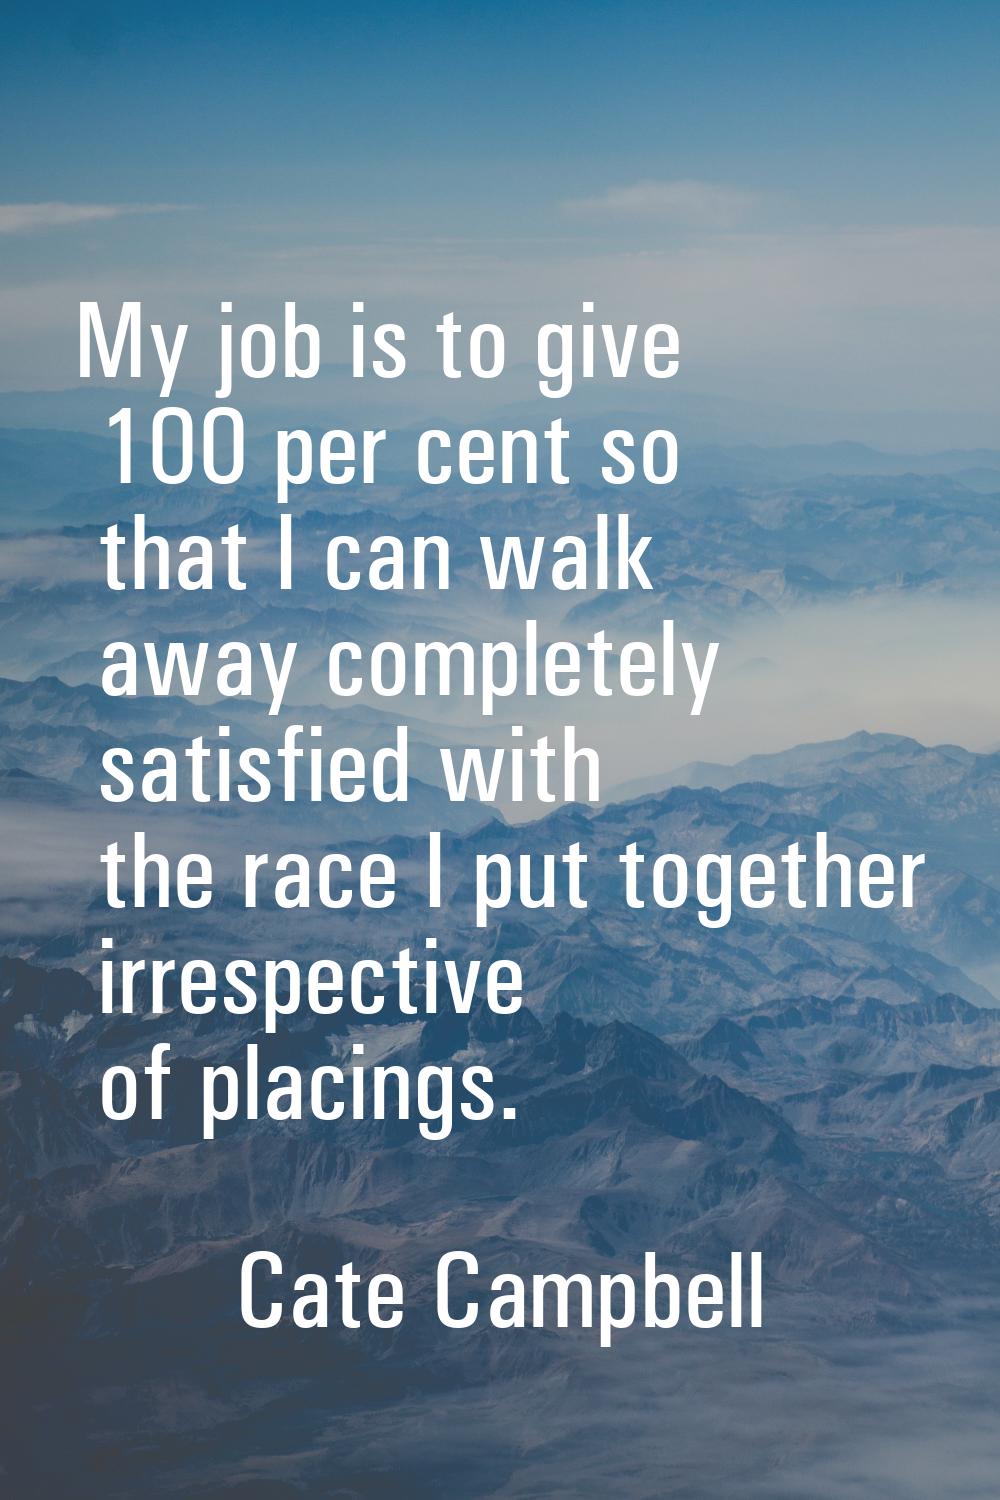 My job is to give 100 per cent so that I can walk away completely satisfied with the race I put tog